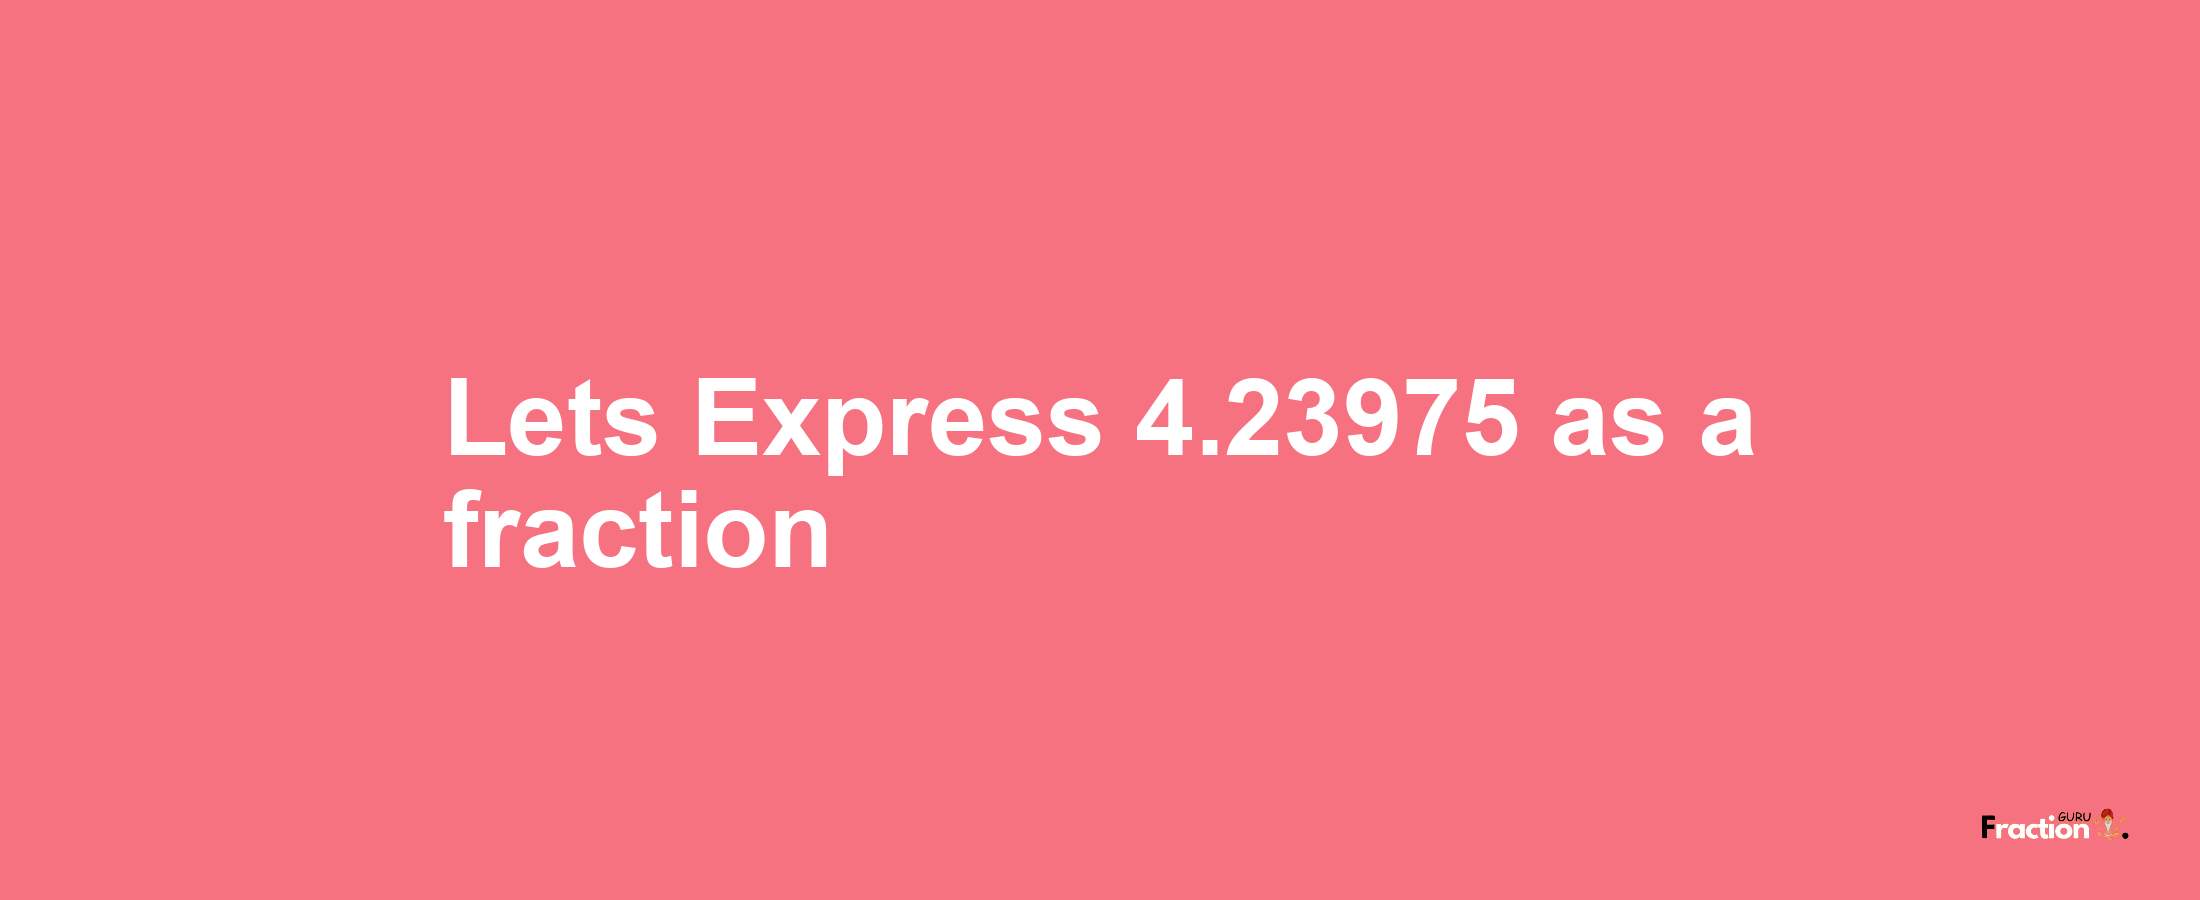 Lets Express 4.23975 as afraction